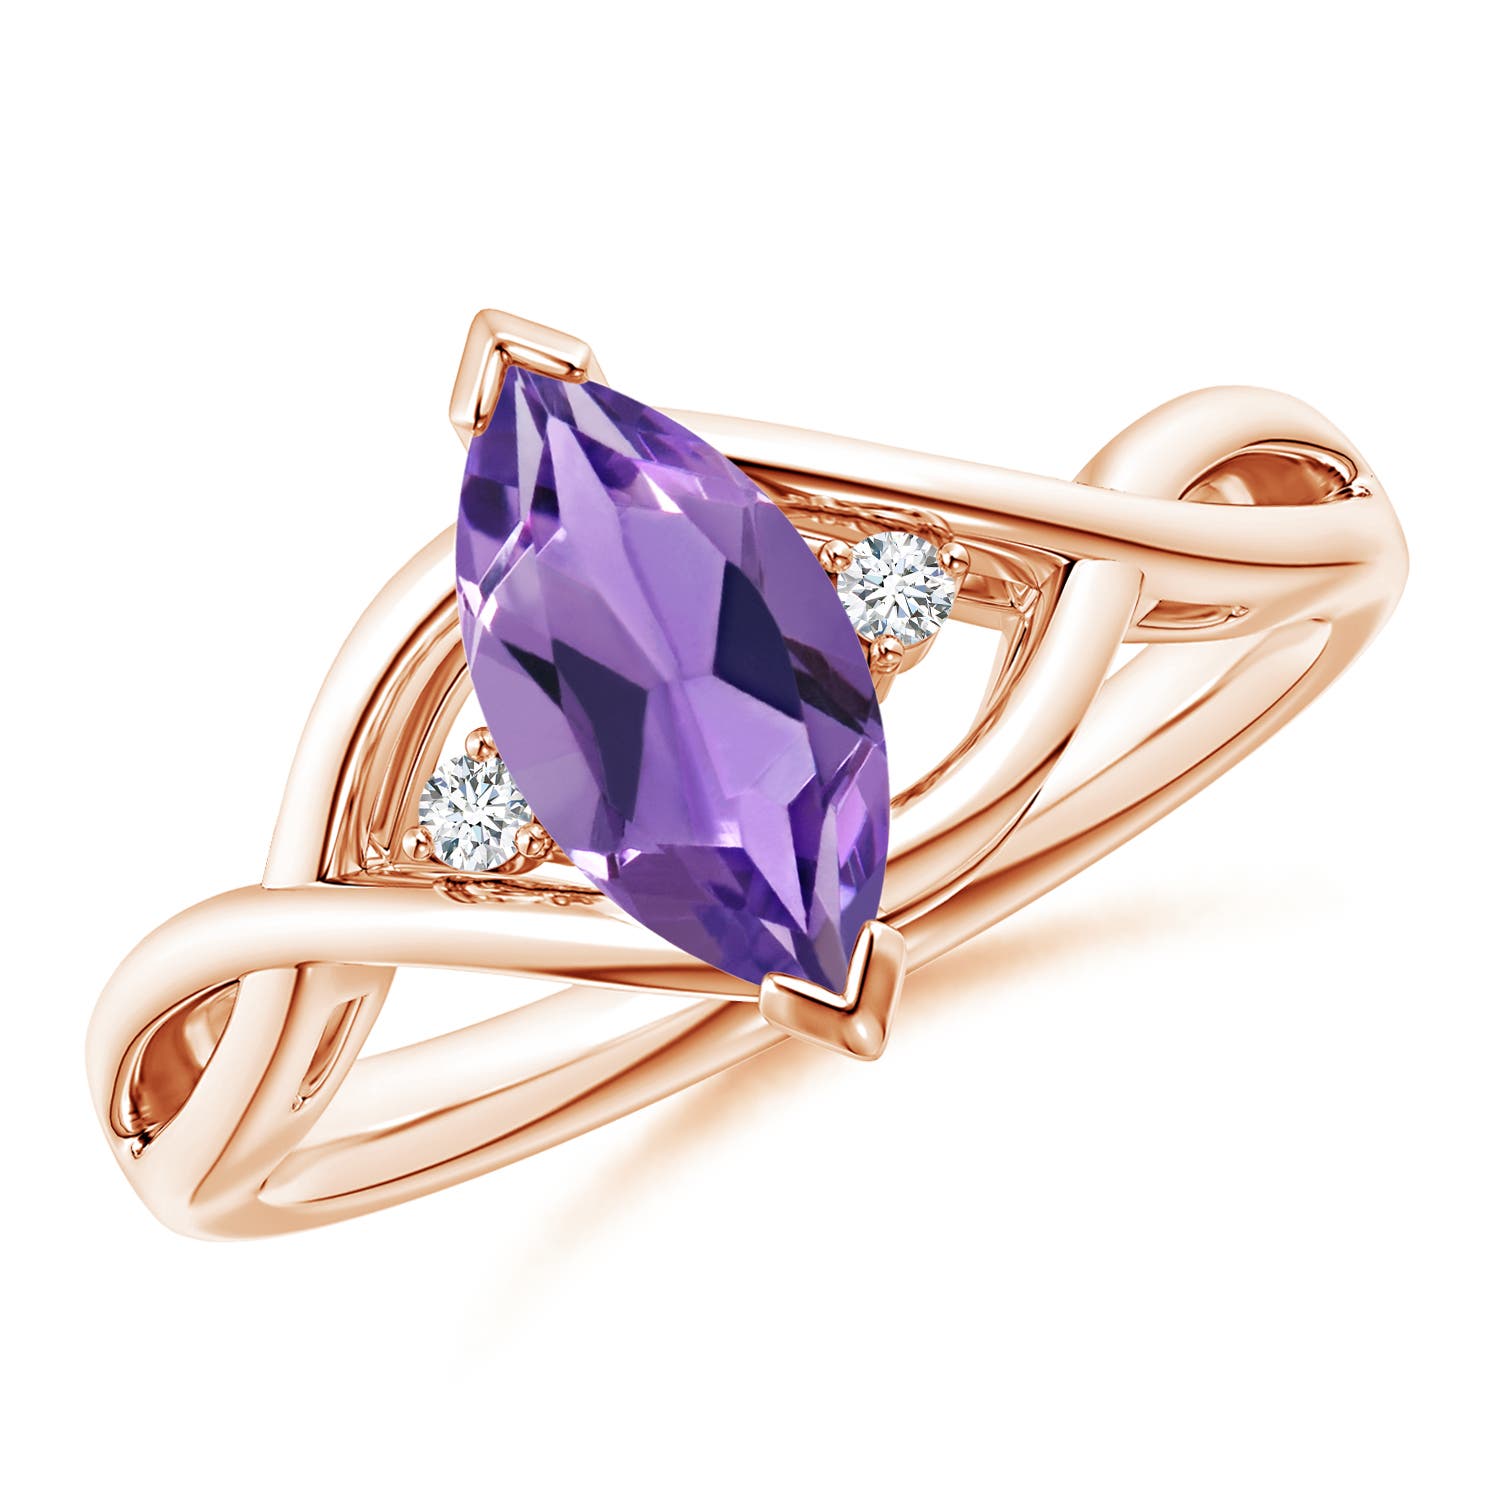 AA - Amethyst / 0.98 CT / 14 KT Rose Gold